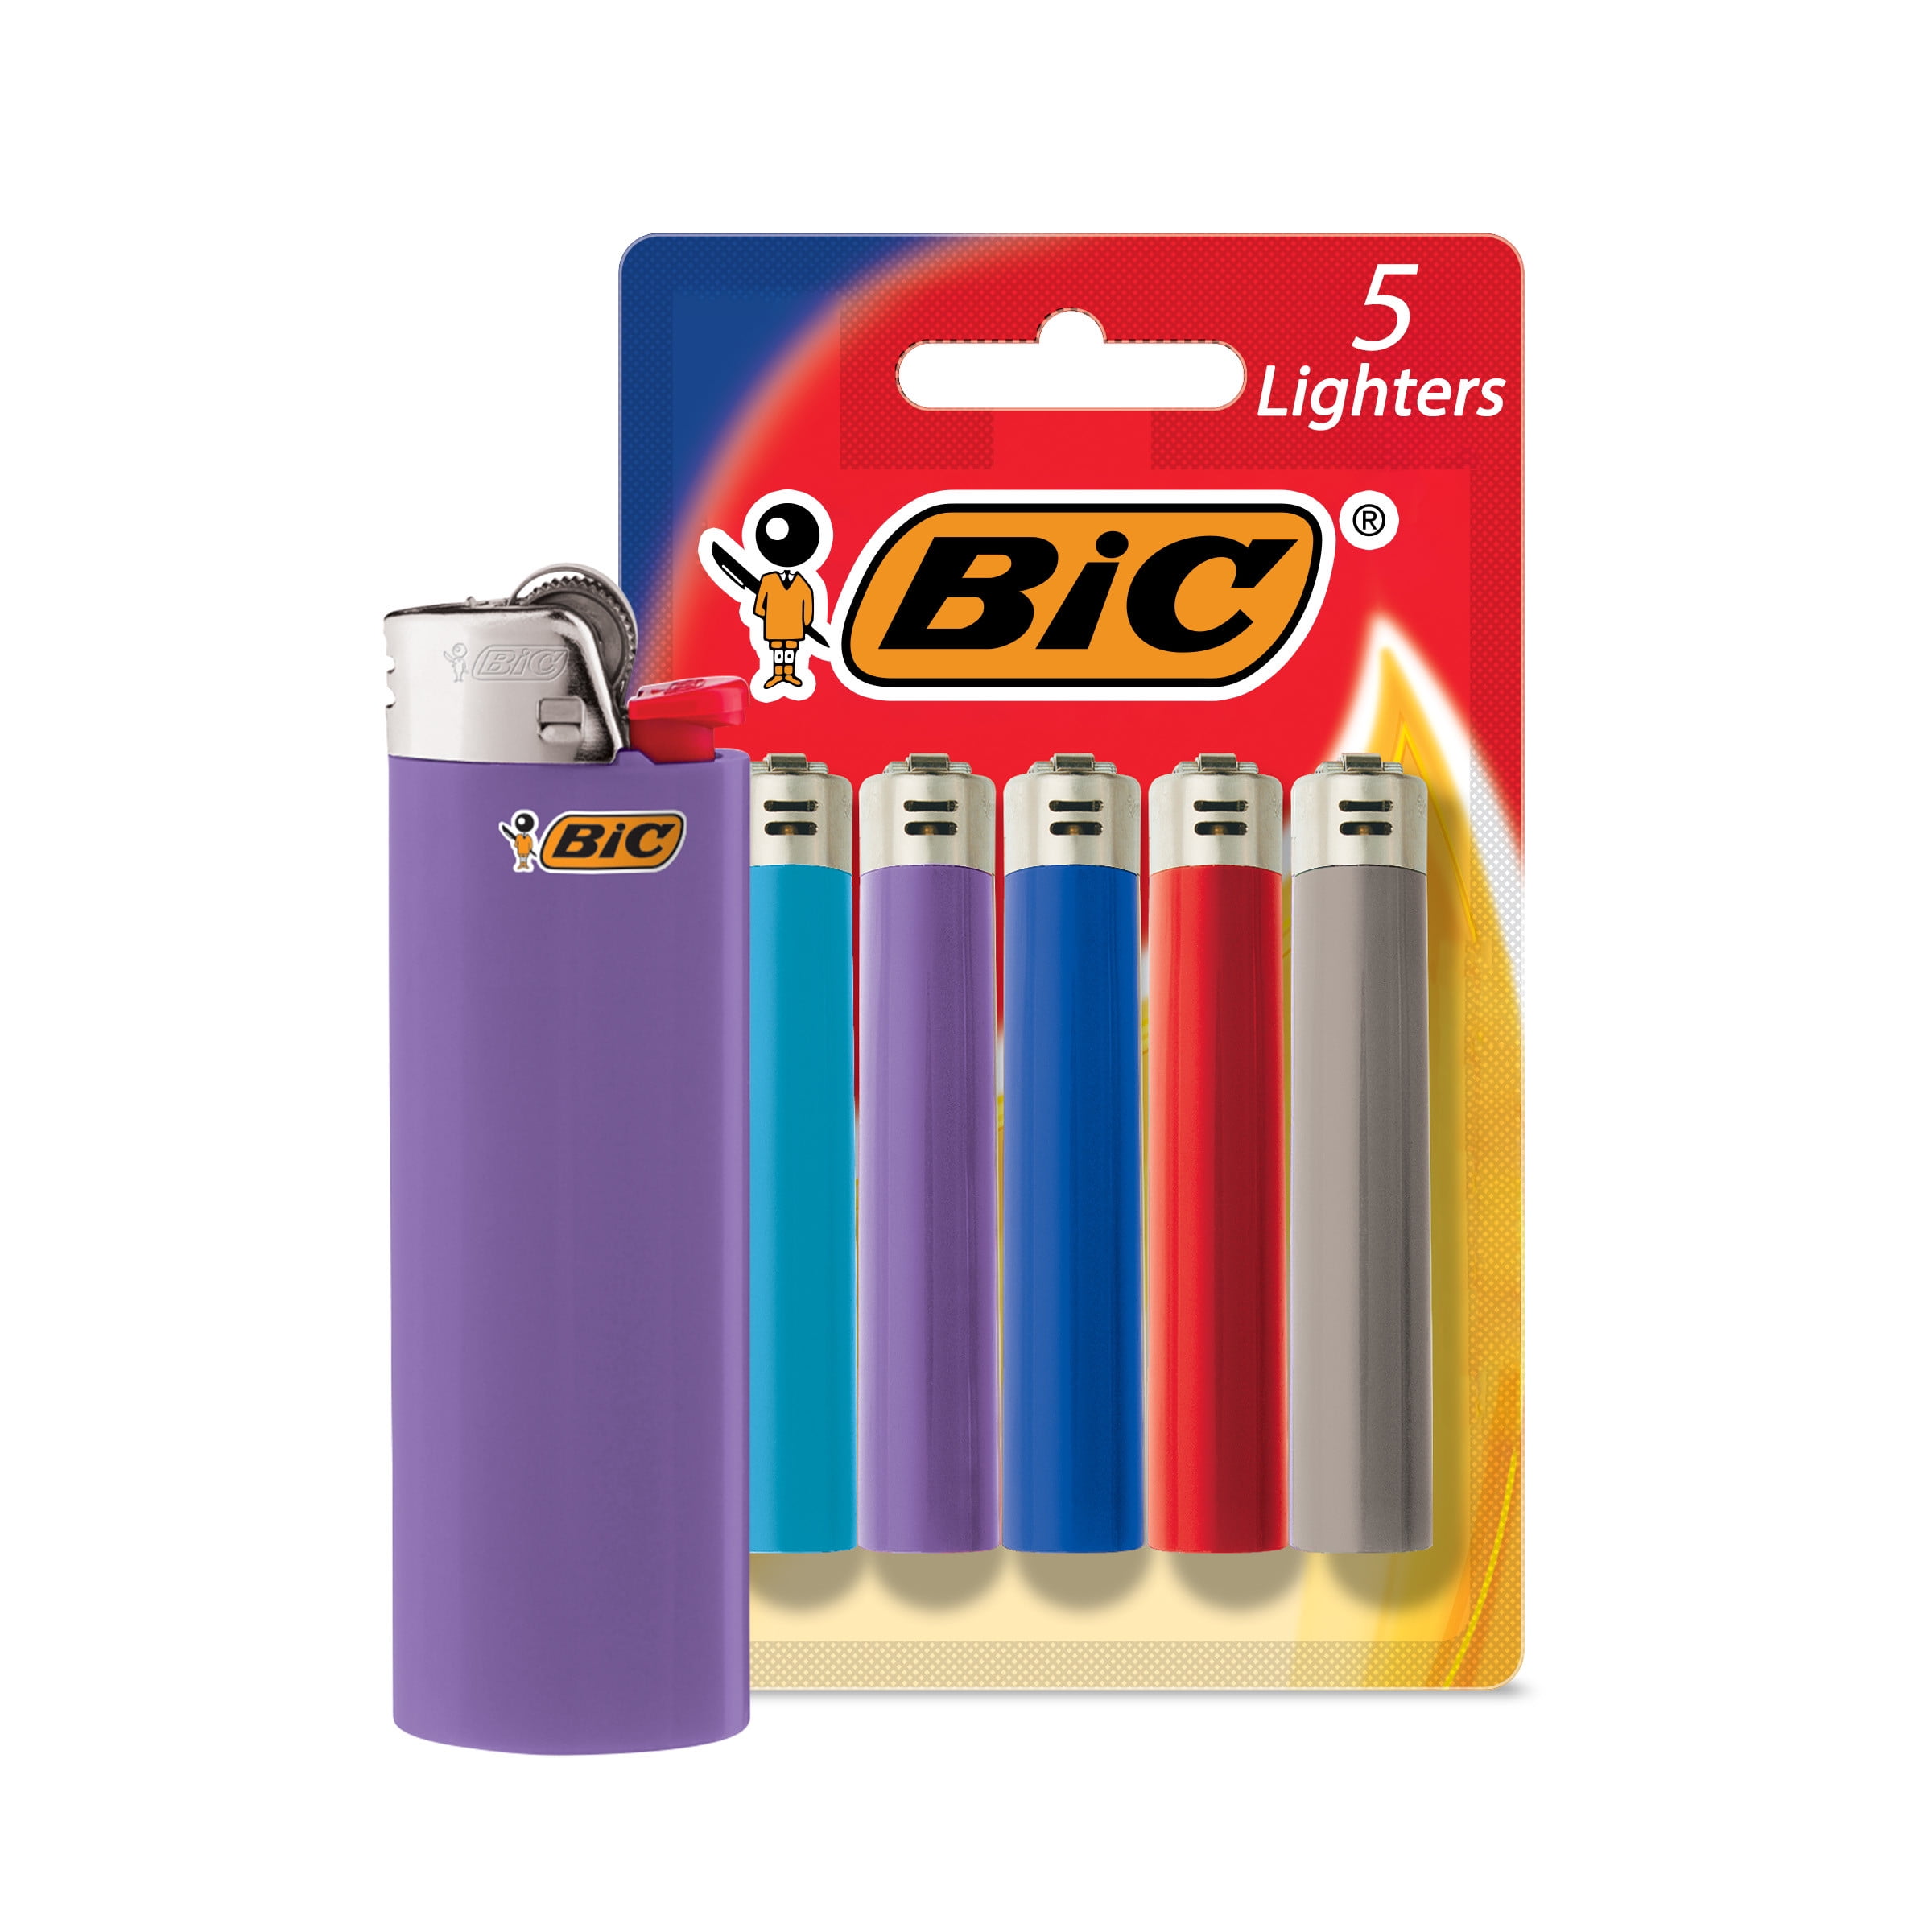 Buy Tooled Leather Lighter Cover Made for BIC Lighters Lighter Online in  India 